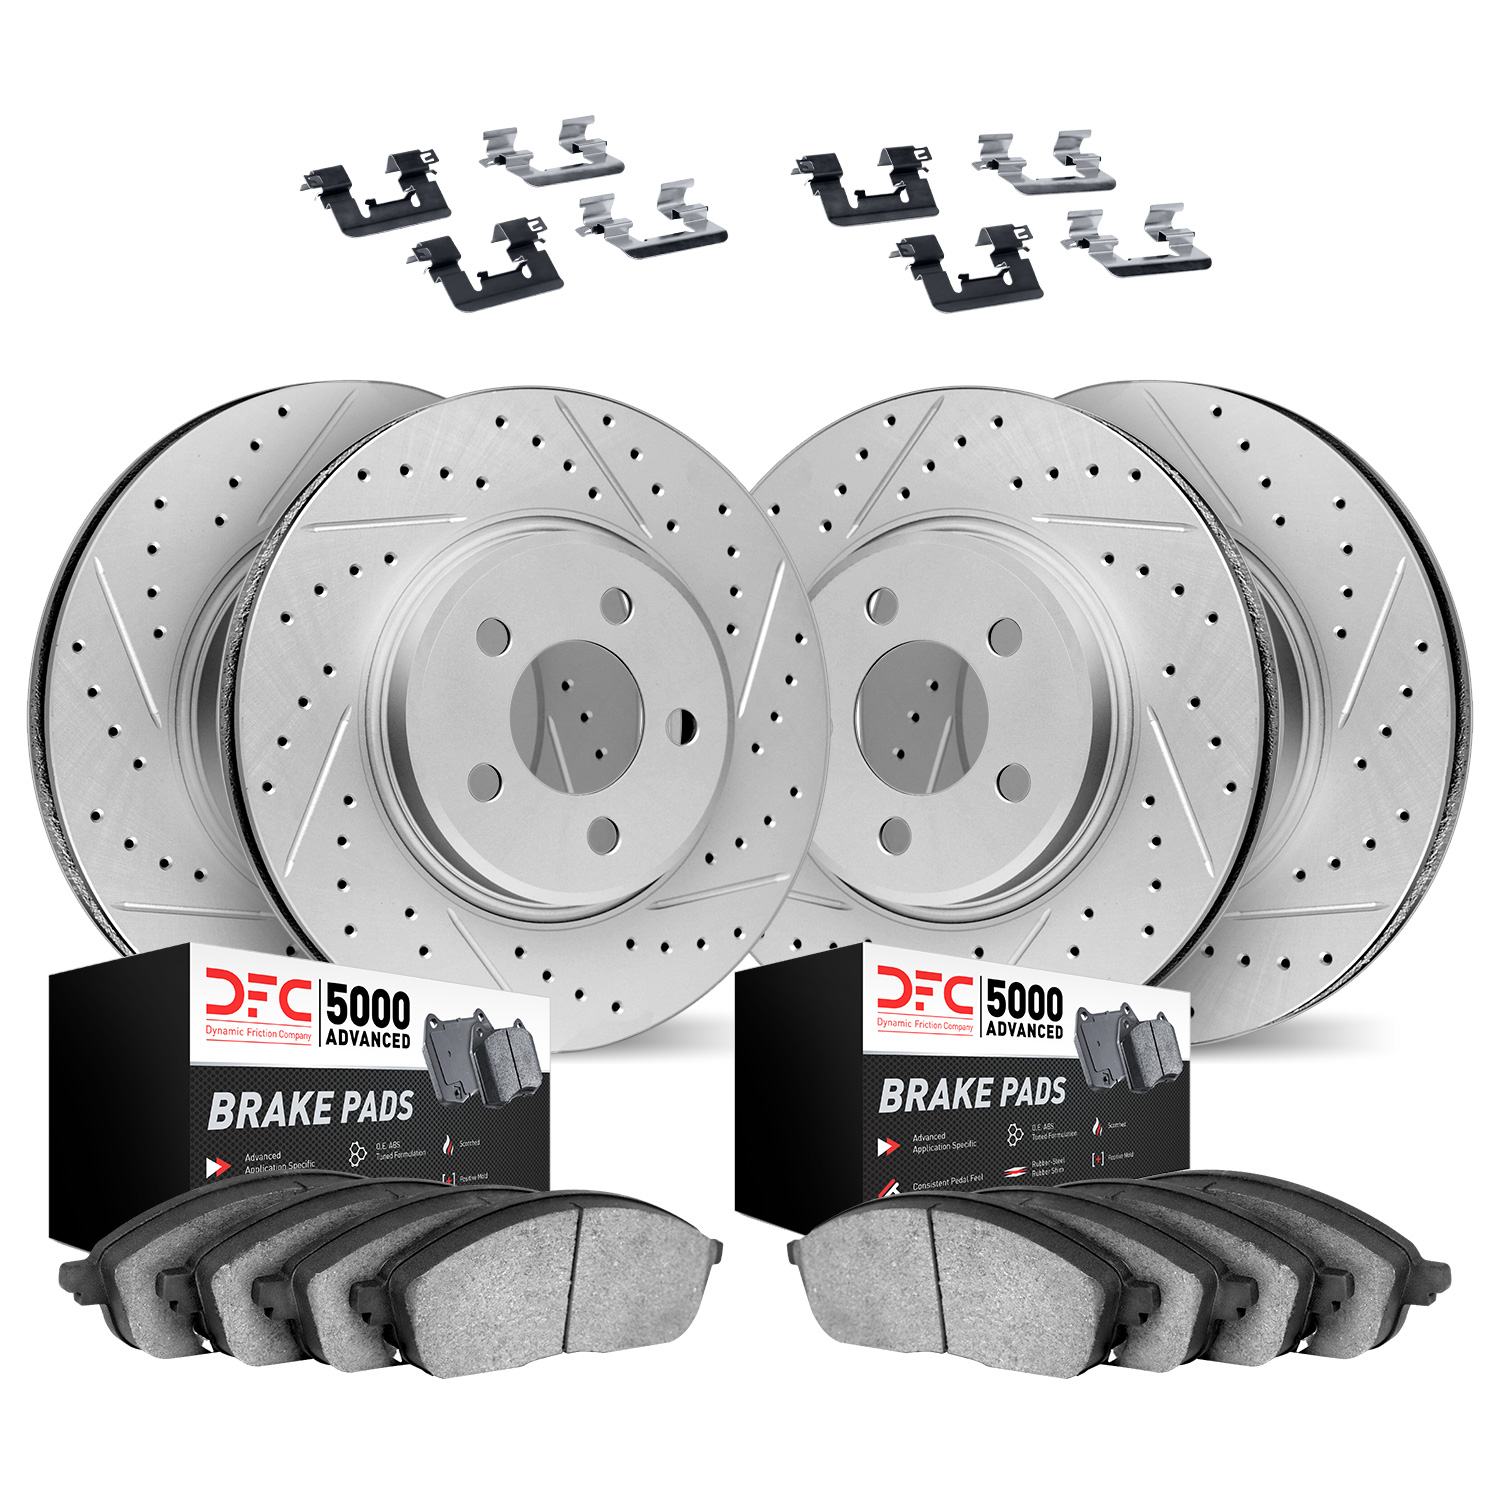 2514-31031 Geoperformance Drilled/Slotted Rotors w/5000 Advanced Brake Pads Kit & Hardware, 2015-2015 BMW, Position: Front and R